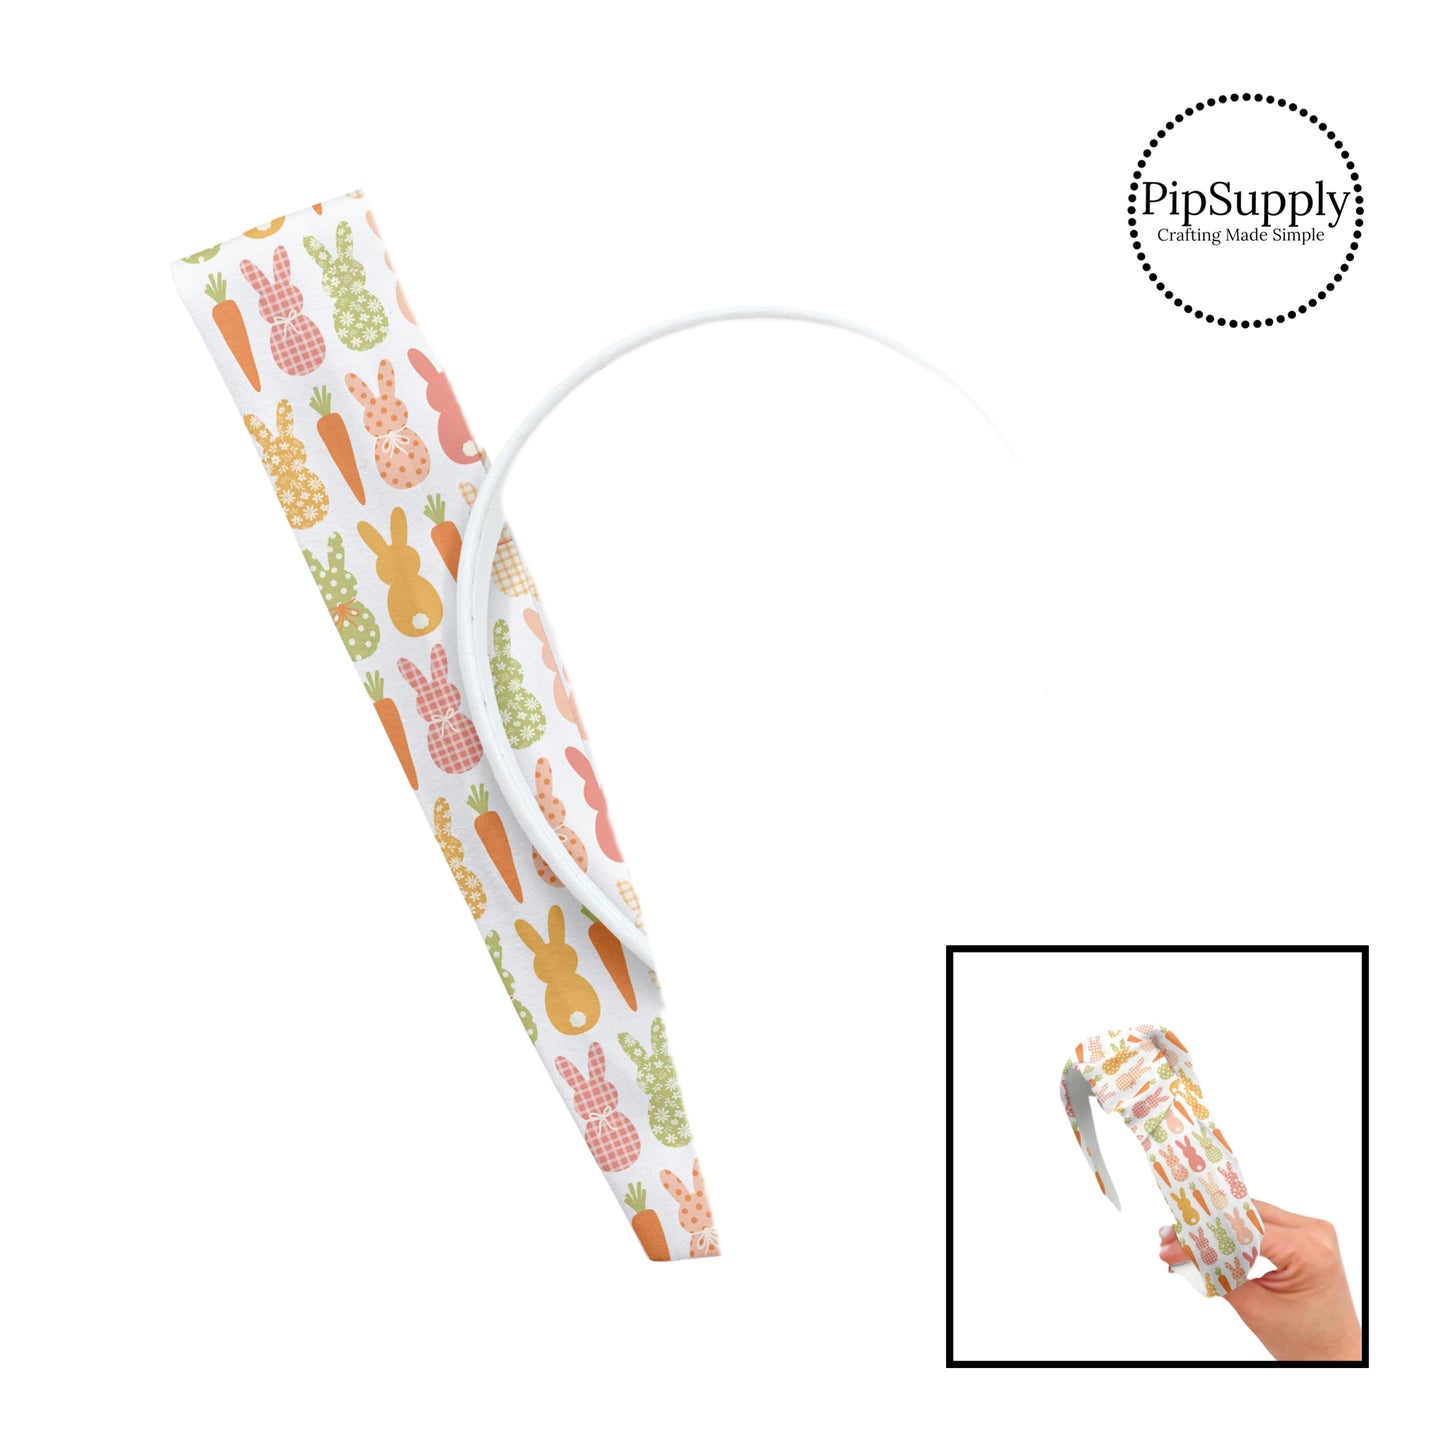 These spring patterned headband kits are easy to assemble and come with everything you need to make your own knotted headband. These kits include a custom printed and sewn fabric strip and a coordinating velvet headband. This cute pattern features warm toned multi-colored bunnies and carrots on cream. 